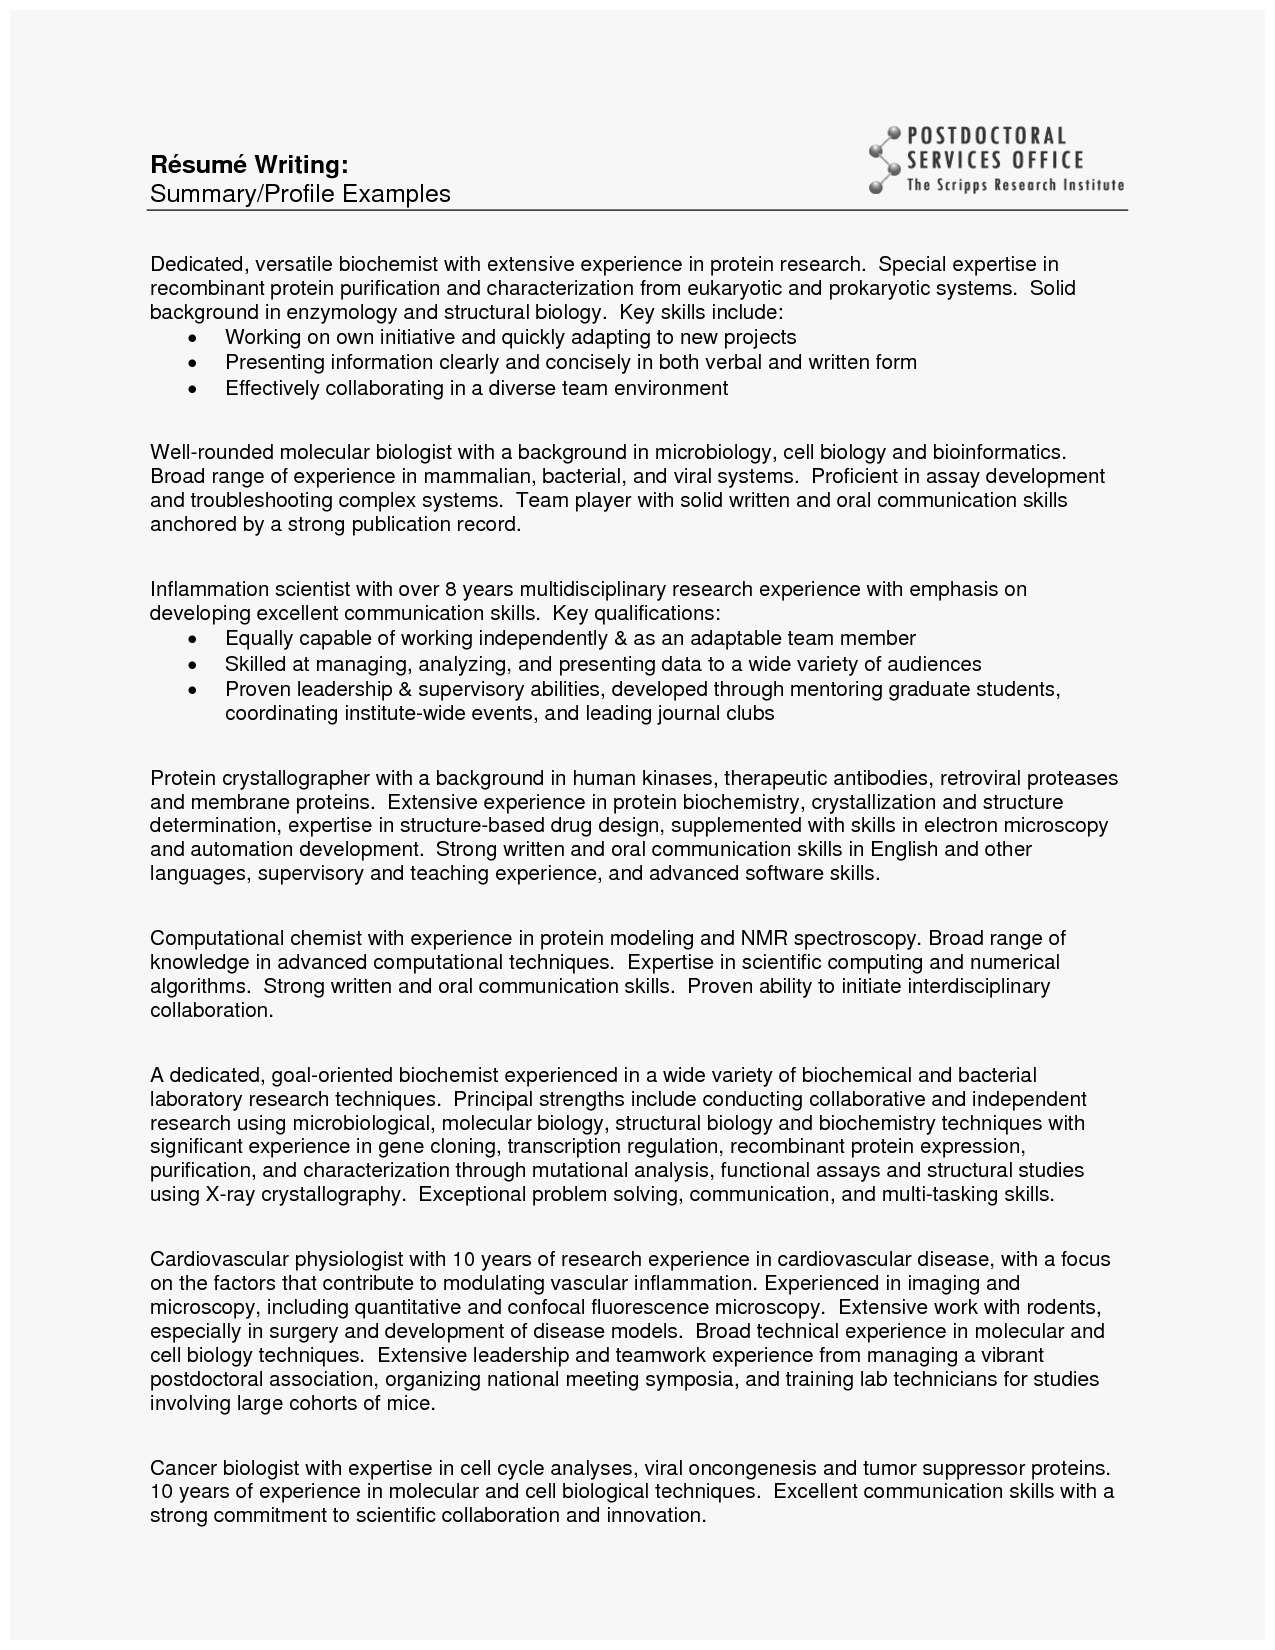 Resume Profile Examples Writing A Resume Profile Best Of Good Resume Profile Examples 2016 Samplebusinessresume Of Writing A Resume Profile resume profile examples|wikiresume.com